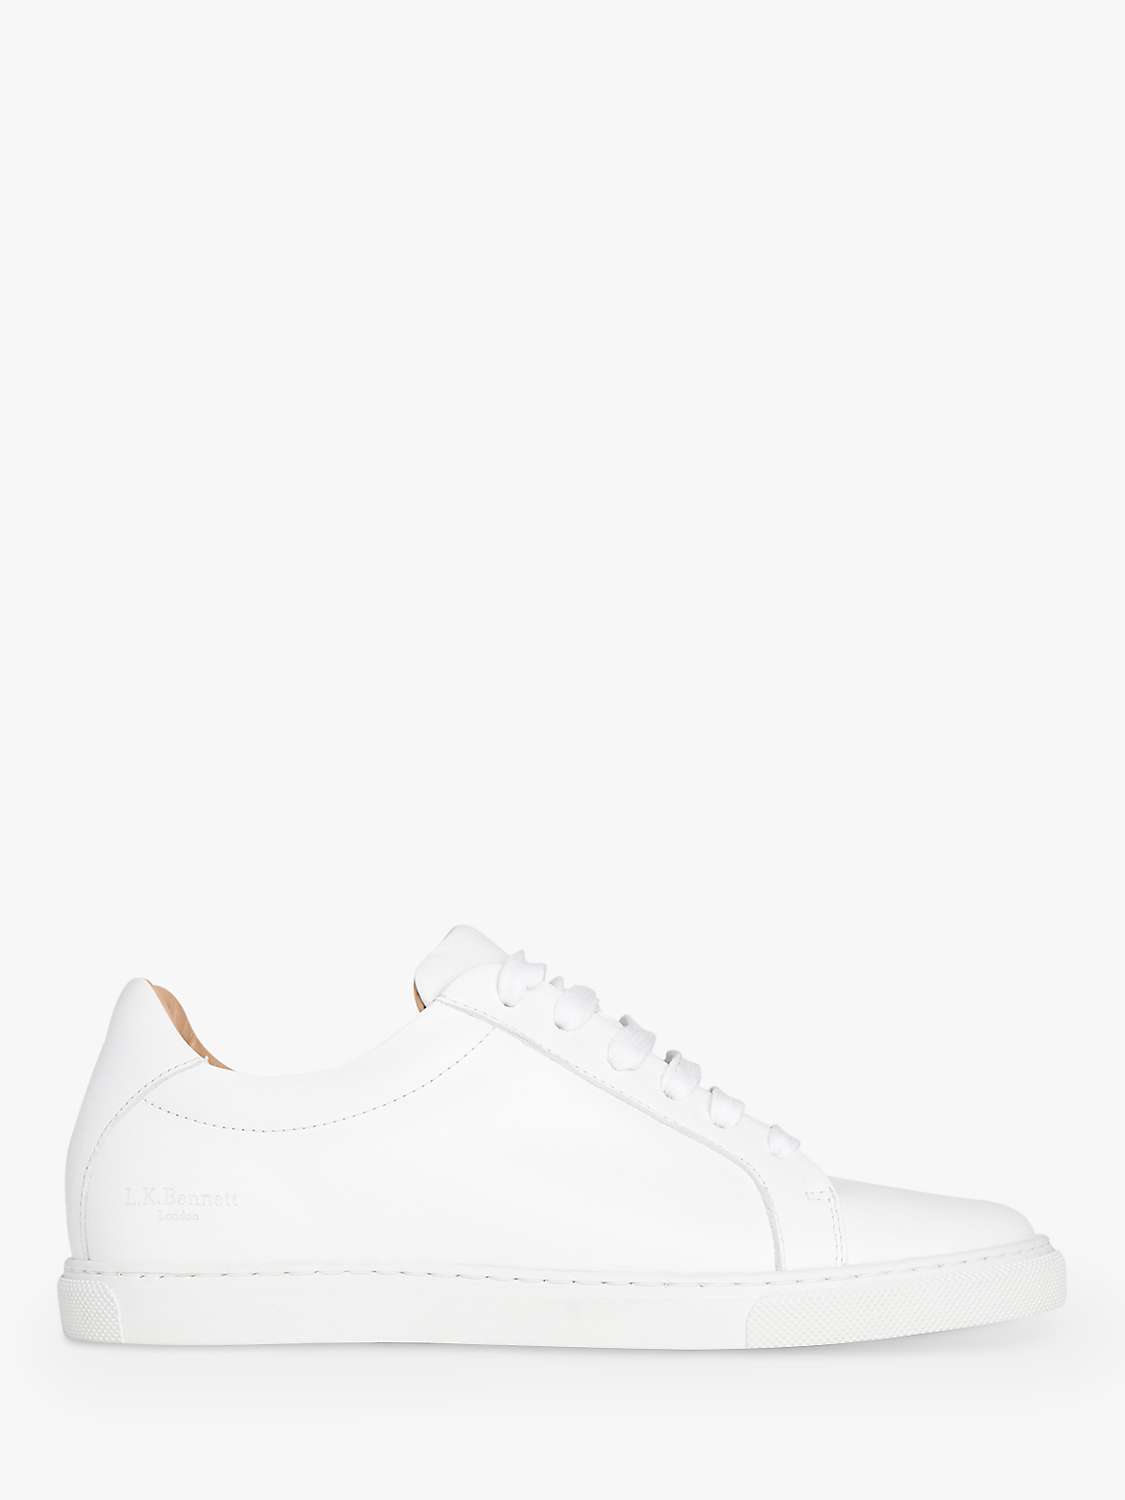 L.K.Bennett Jack Nappa Leather Trainers, White at John Lewis & Partners